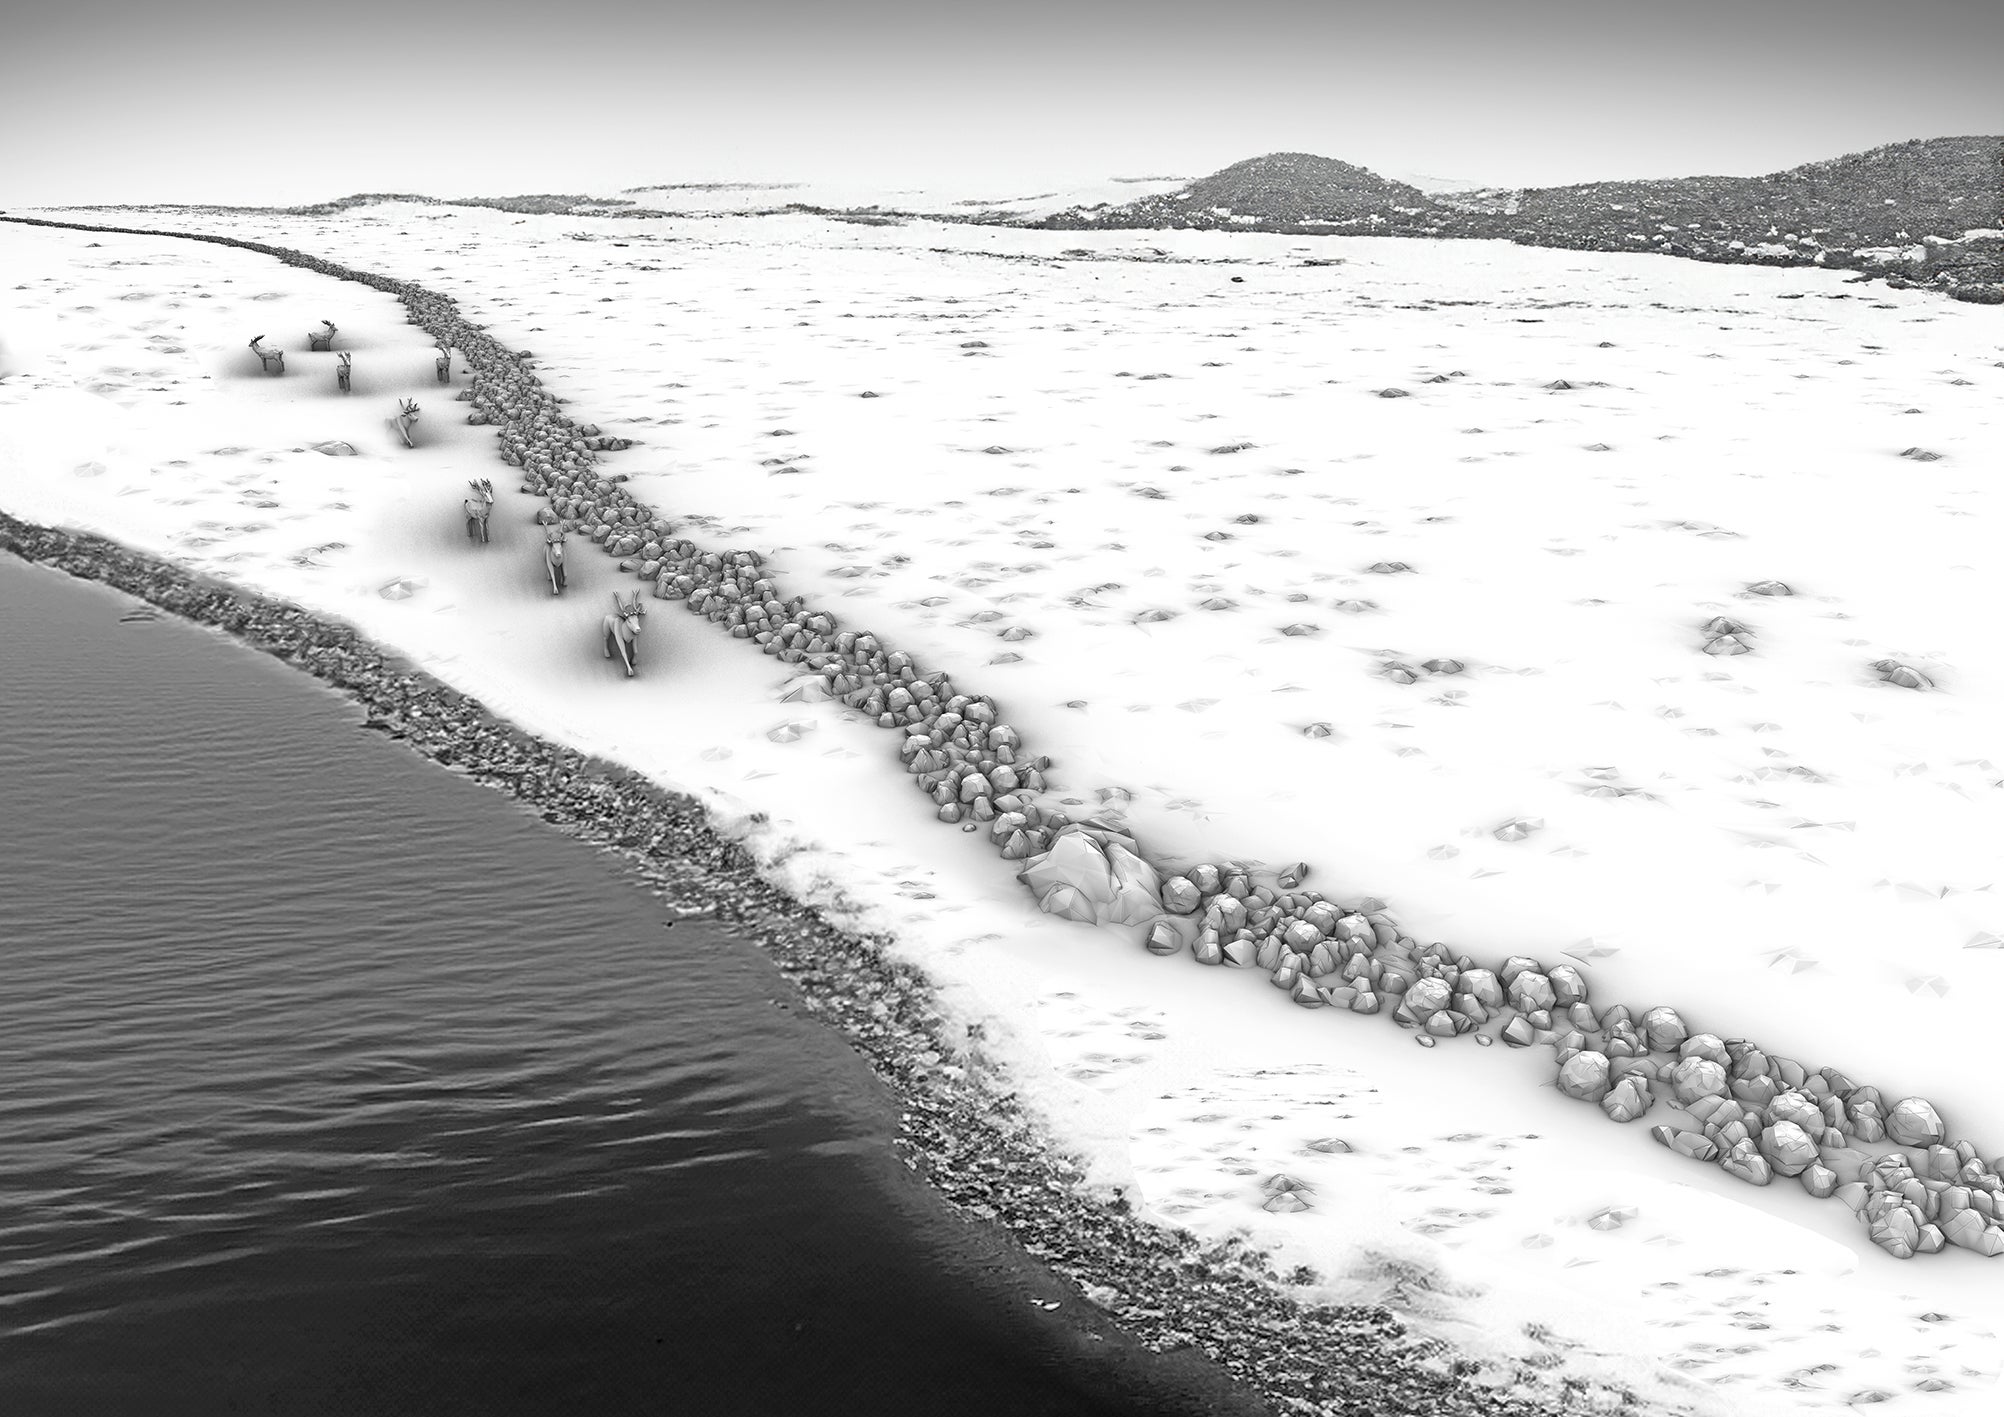 Artist's impression of a Blinkerwall (stone wall) in snow next to river